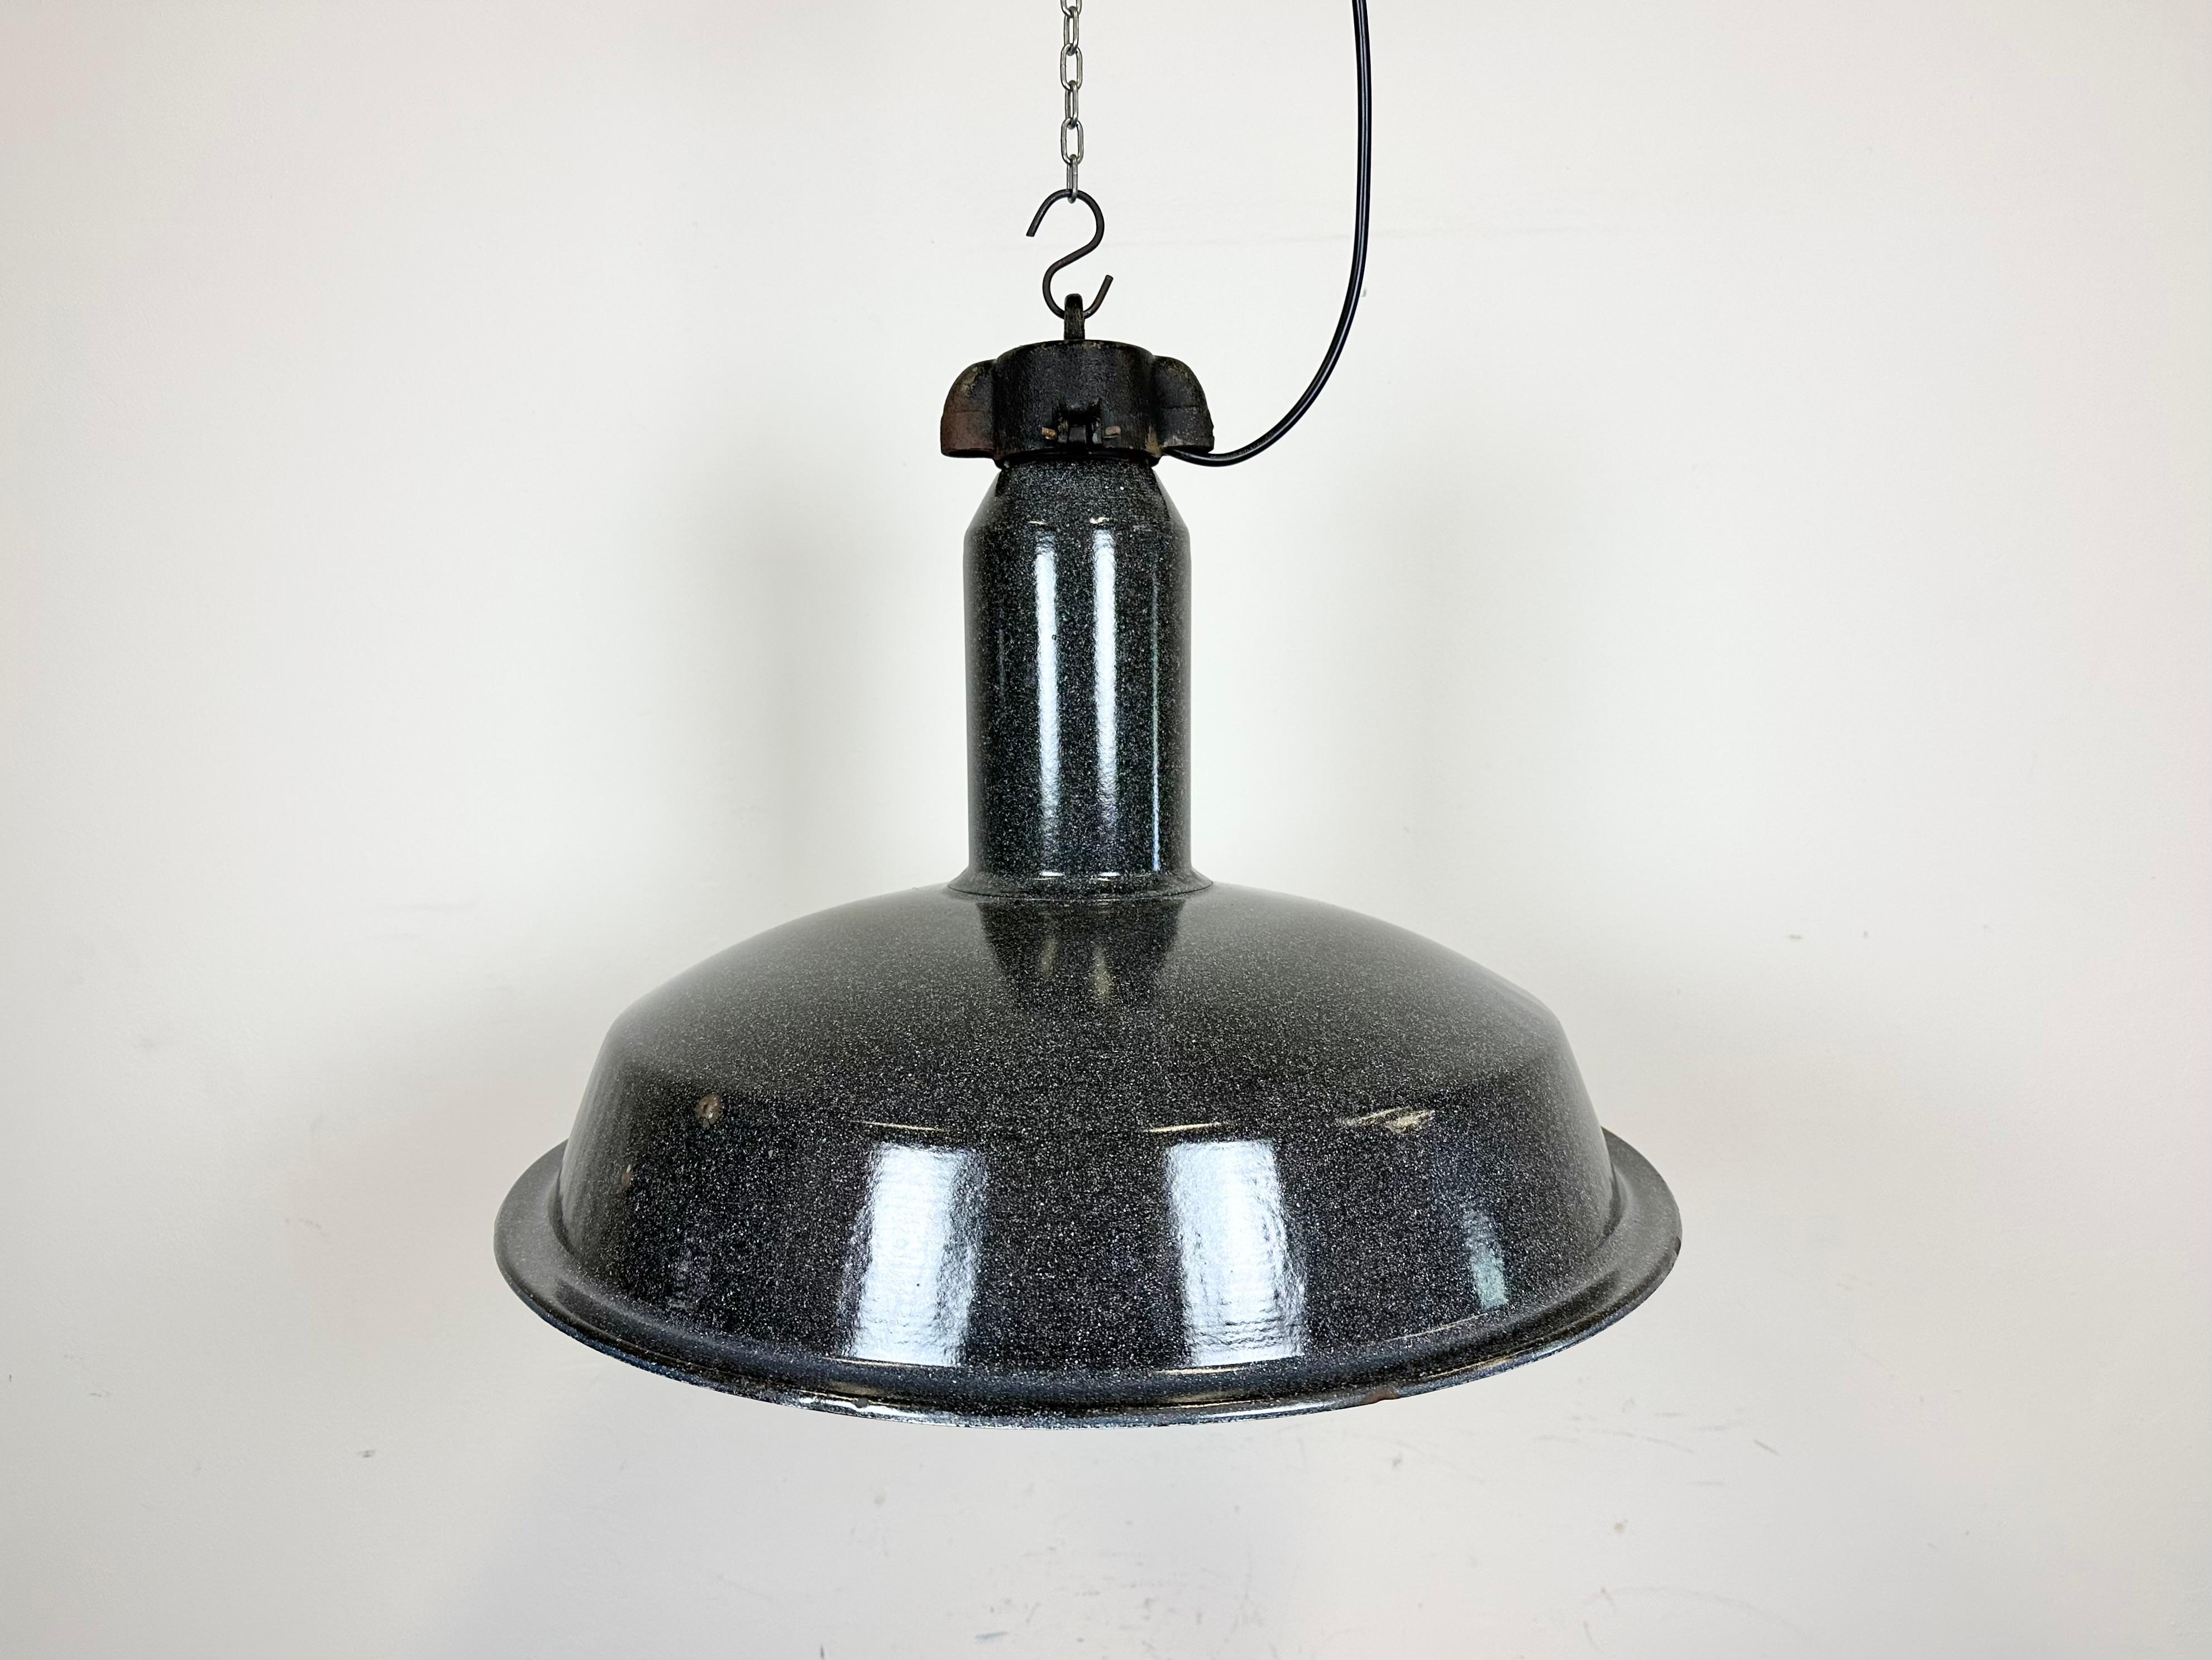 Industrial dark grey enamel pendant light made by Elektrosvit in former Czechoslovakia during the 1960s. White enamel inside the shade. Cast iron top. The porcelain socket requires standard E 27/ E26 light bulbs. New wire. Fully functional. The